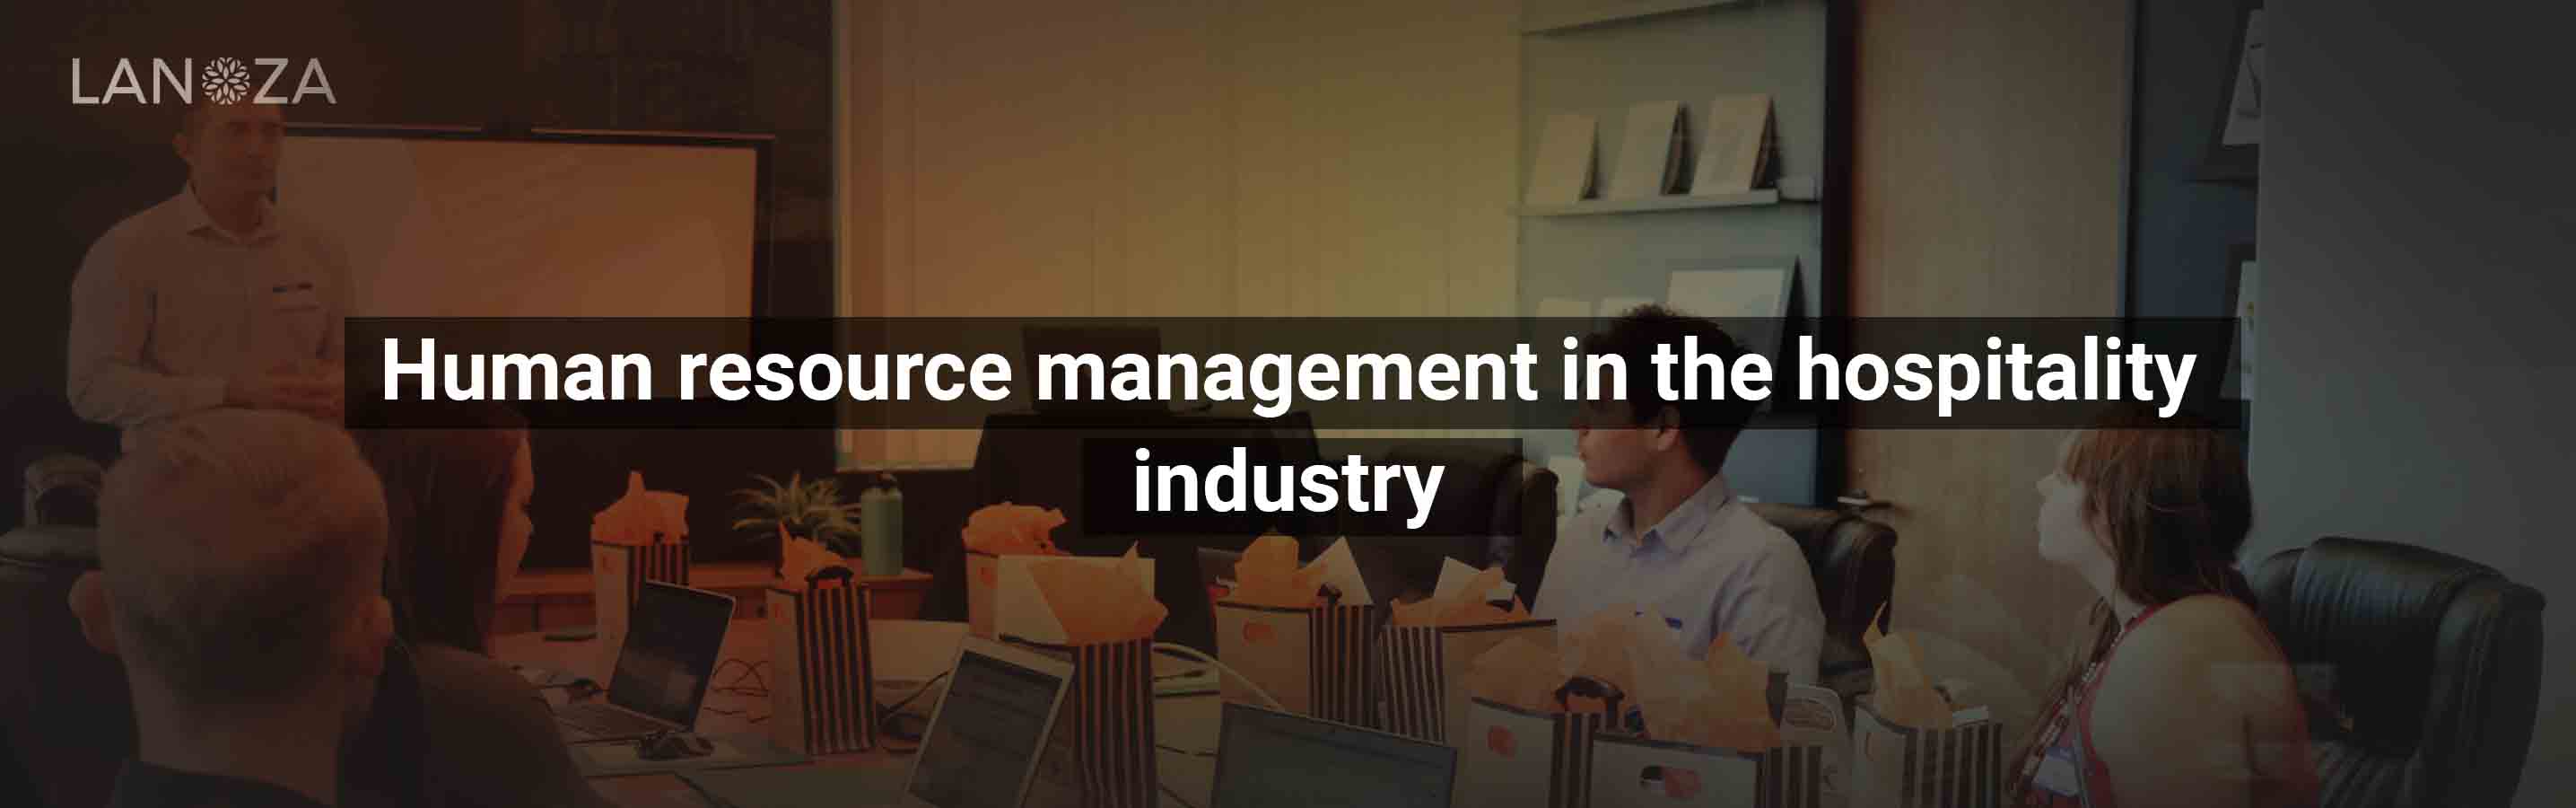 human-resource-management-in-the-hospitality-industry